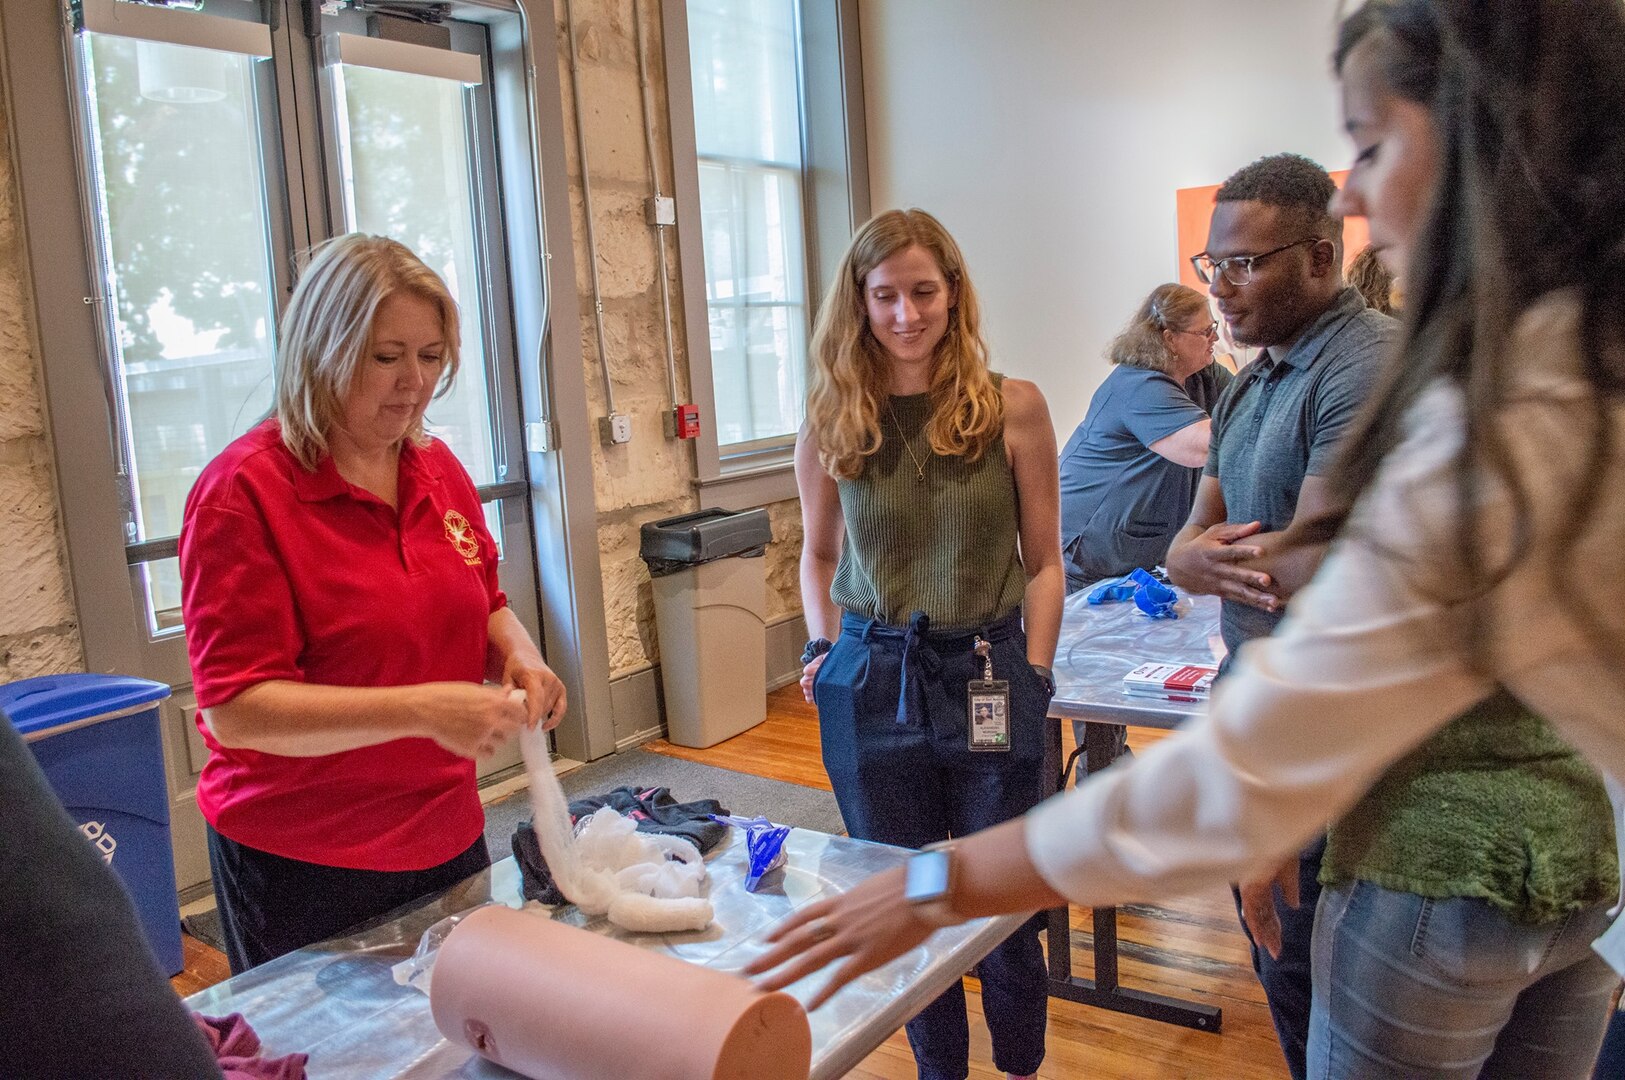 Gina Pickard, Trauma Division manager at Brooke Army Medical Center’s Trauma Clinic, shows City of San Antonio council staff members how to pack a wound during Stop the Bleed held at the Plaza de Armas building in downtown San Antonio Aug. 29. The training consisted of a presentation where attendees learned the “ABCs of Bleeding Control” along with some hands-on practice in applying tourniquets, packing wounds and applying direct pressure to stop bleeding.